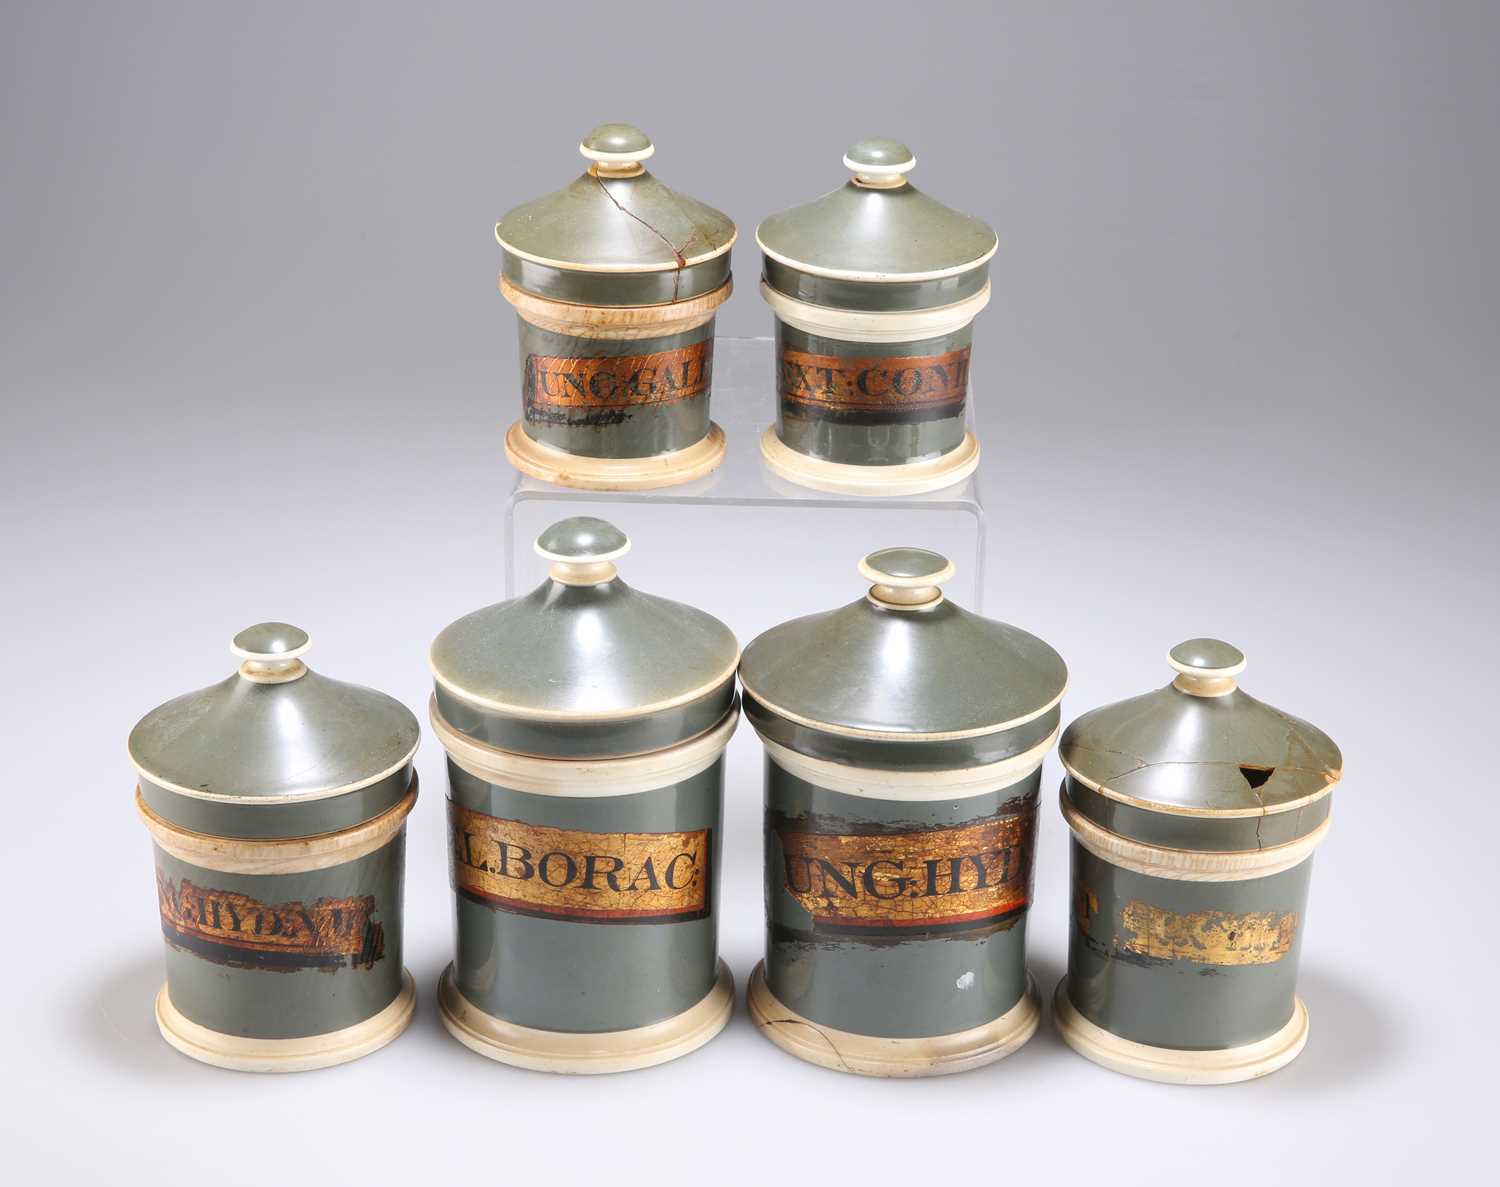 A GROUP OF SIX LATE 19TH/EARLY 20TH CENTURY CERAMIC CHEMISTS JARS